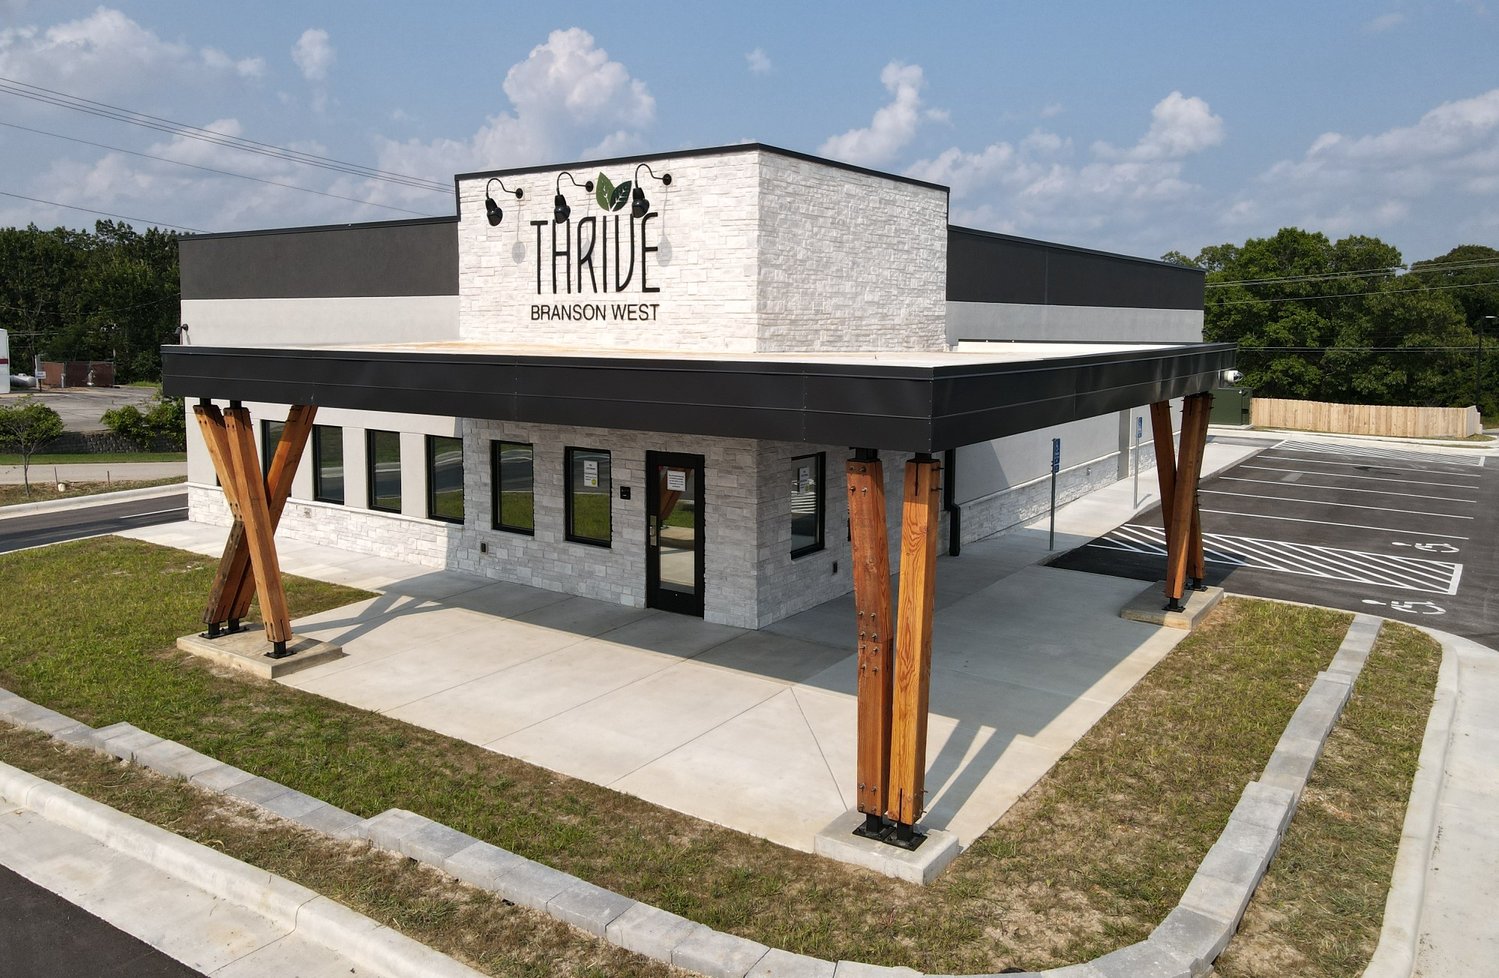 Thrive Branson West is one of two Missouri dispensaries planned by the owners.